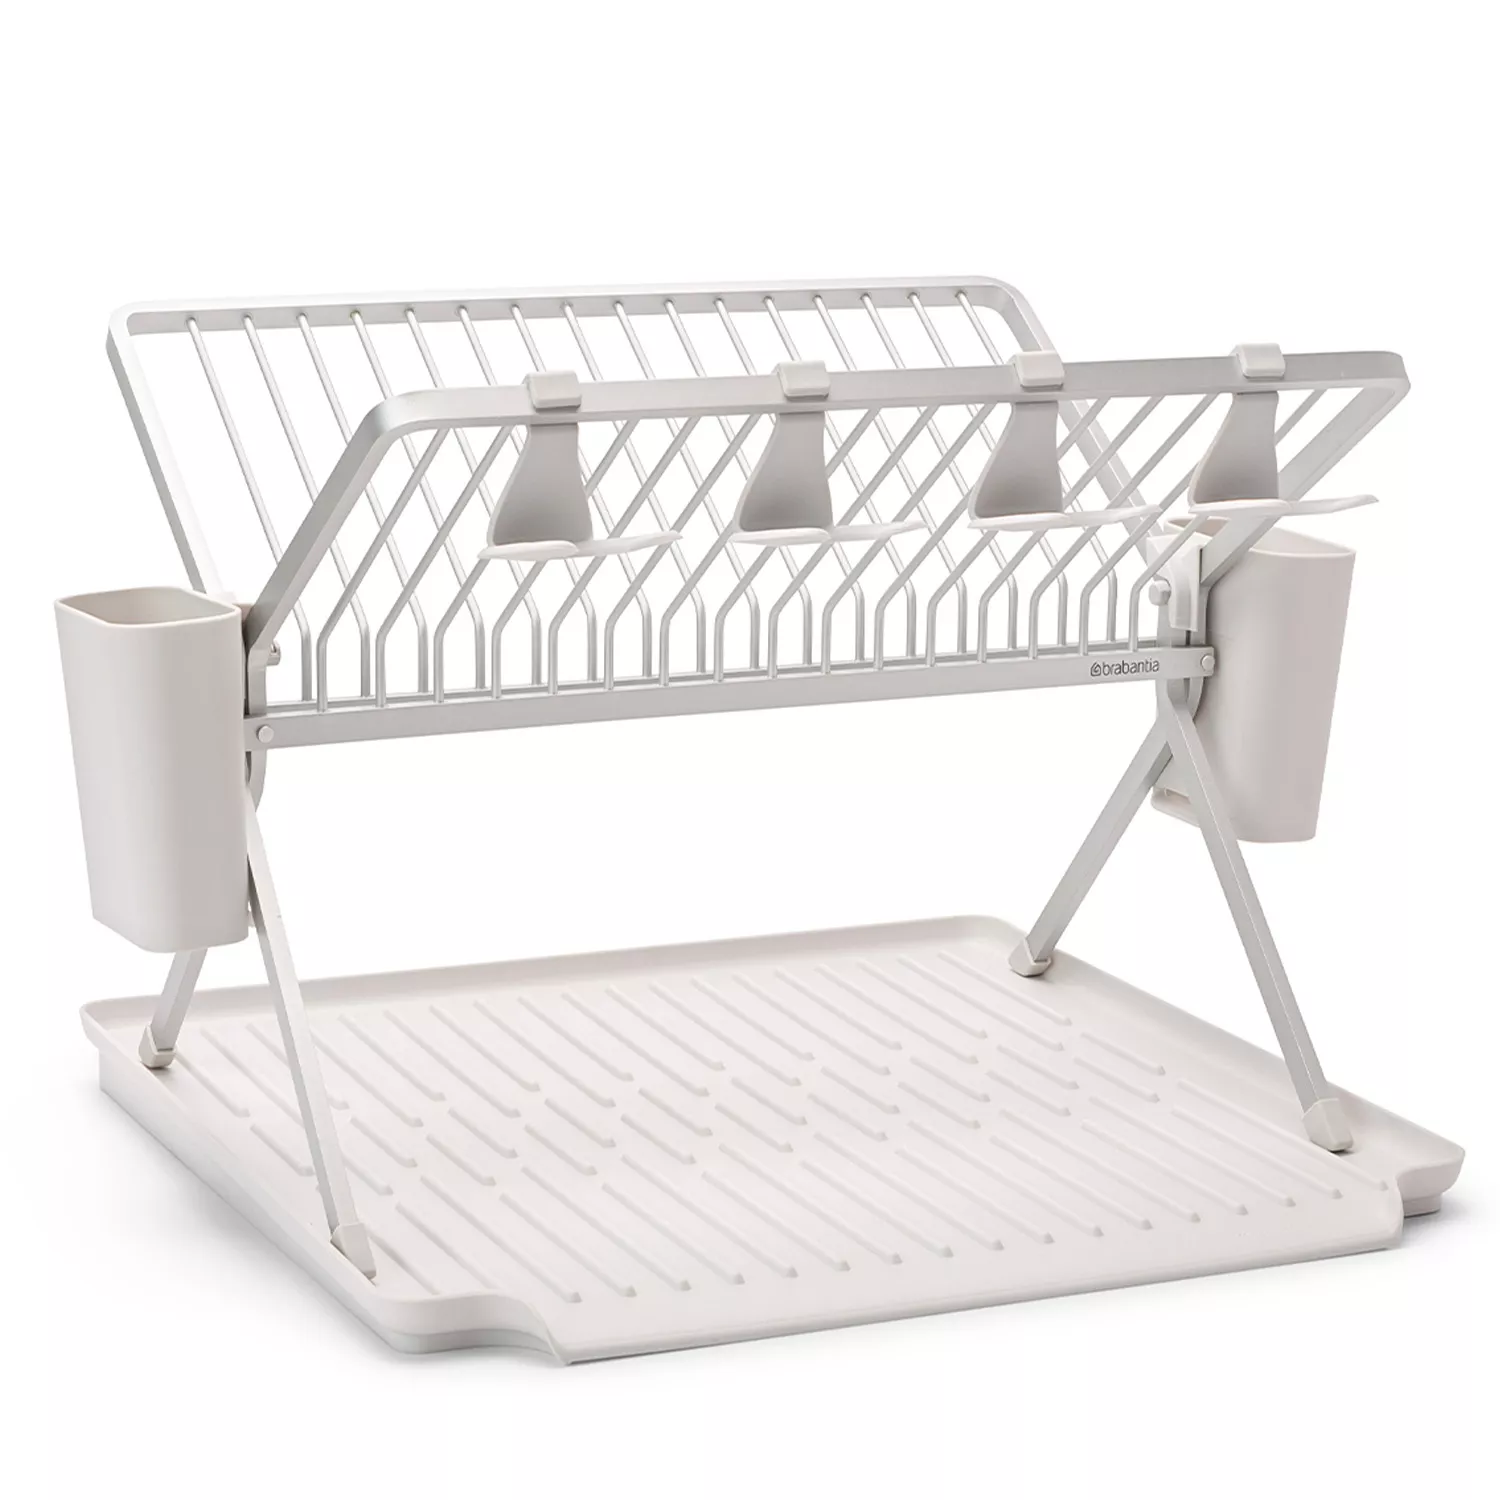 Sur La Table Over-the-Sink Drying Rack